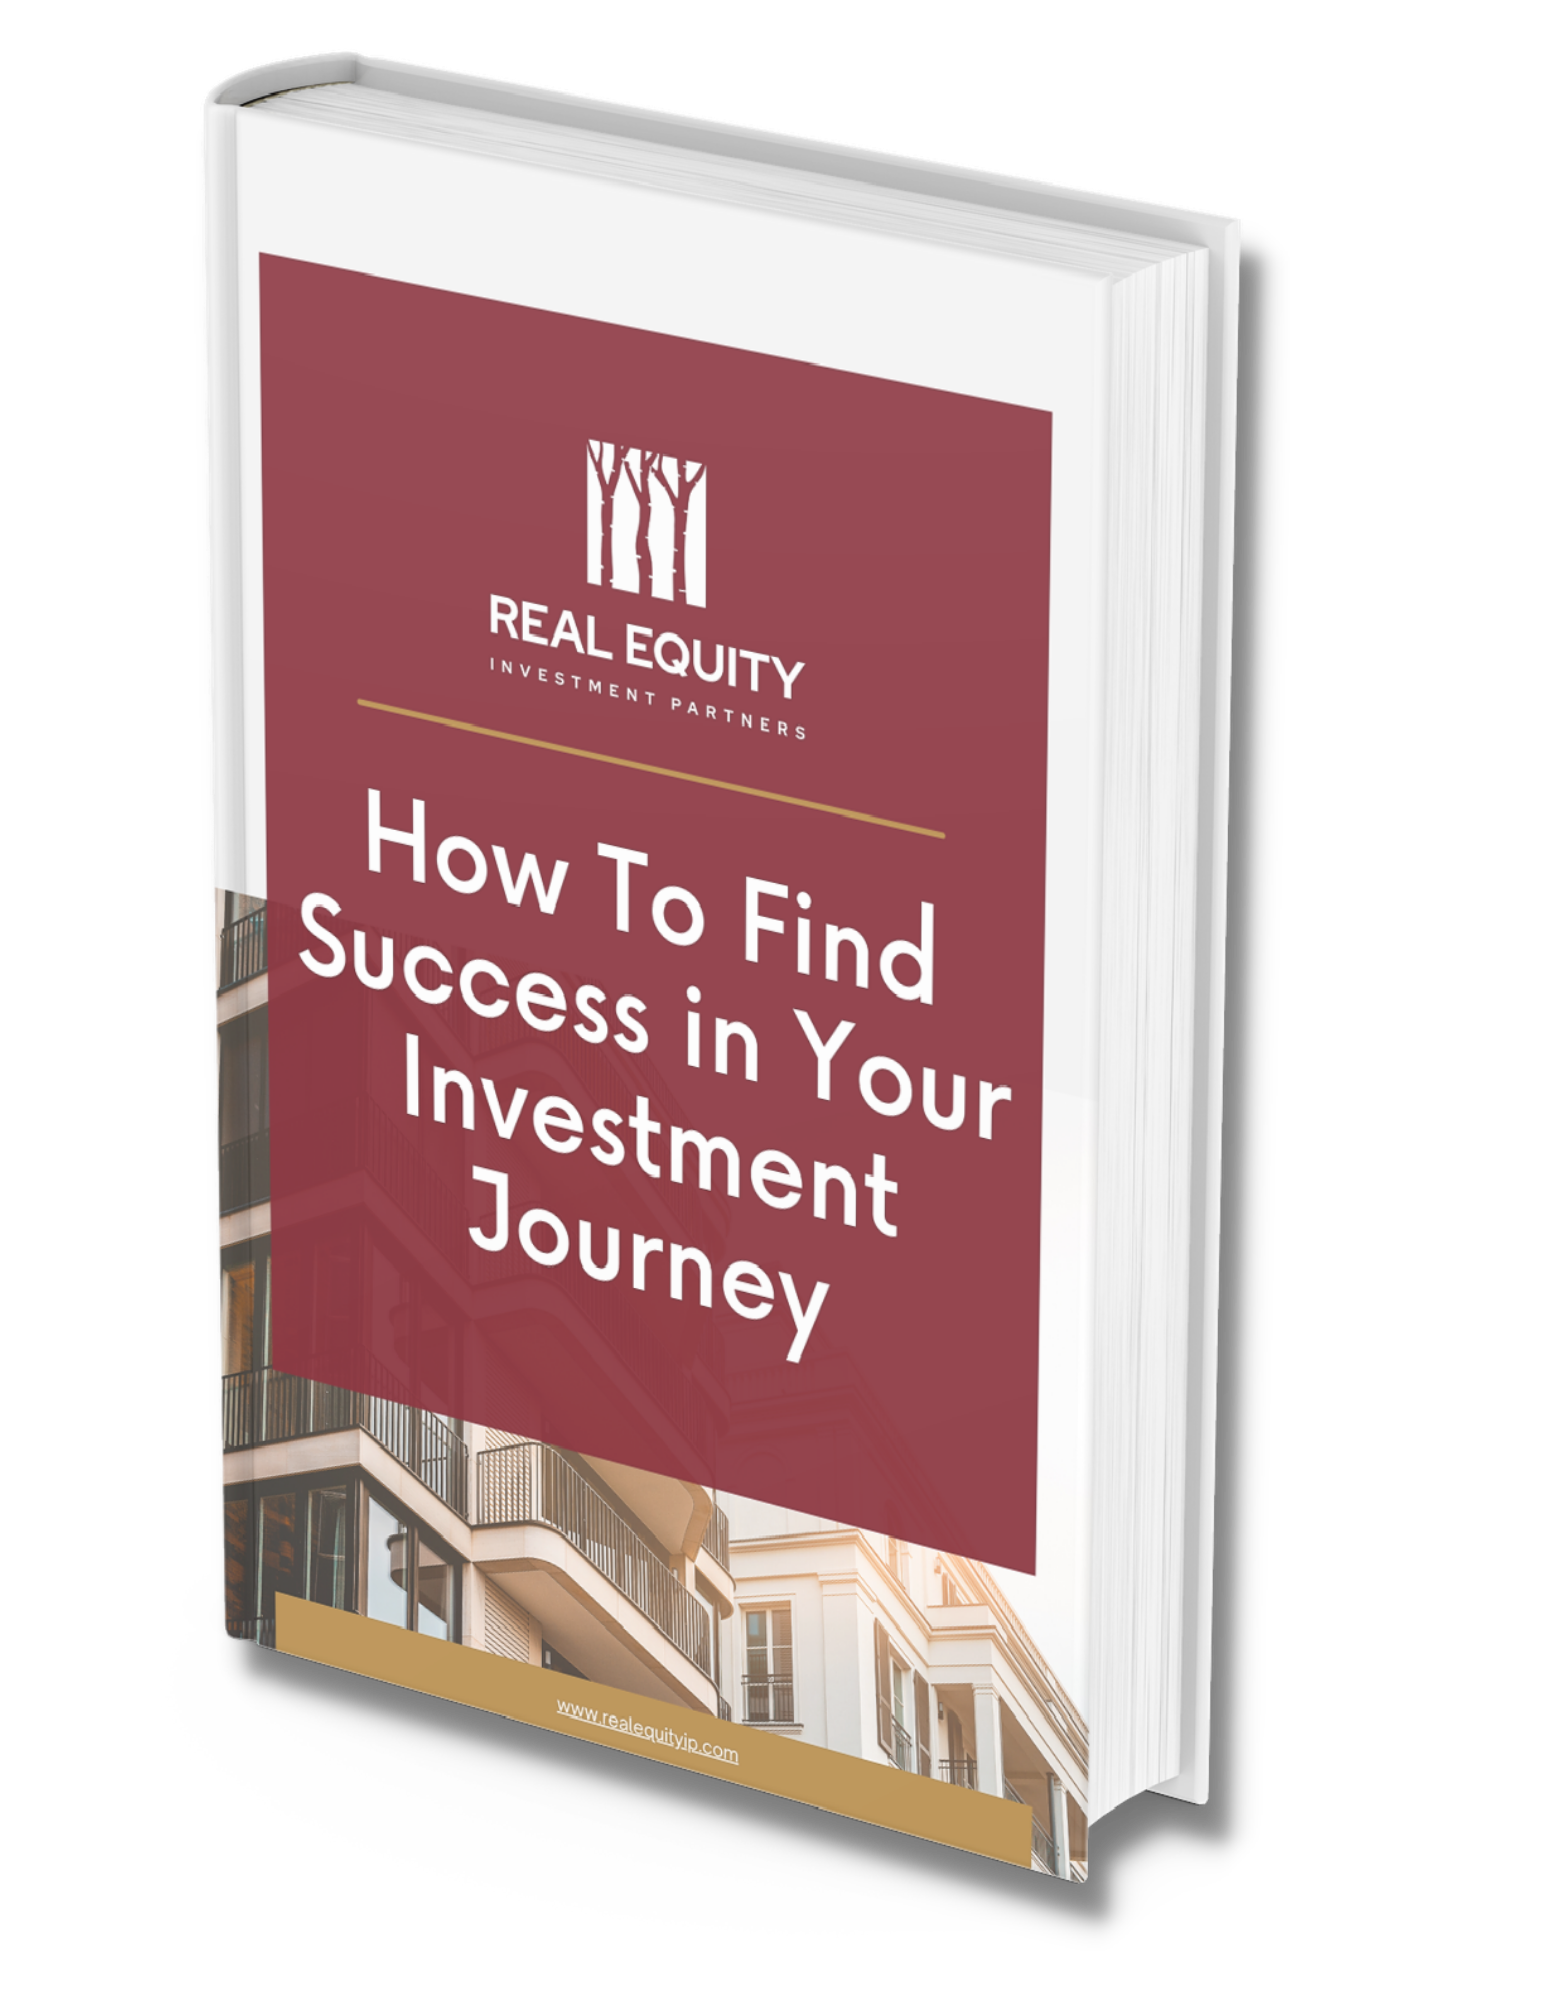 start your investment journey book pdf download